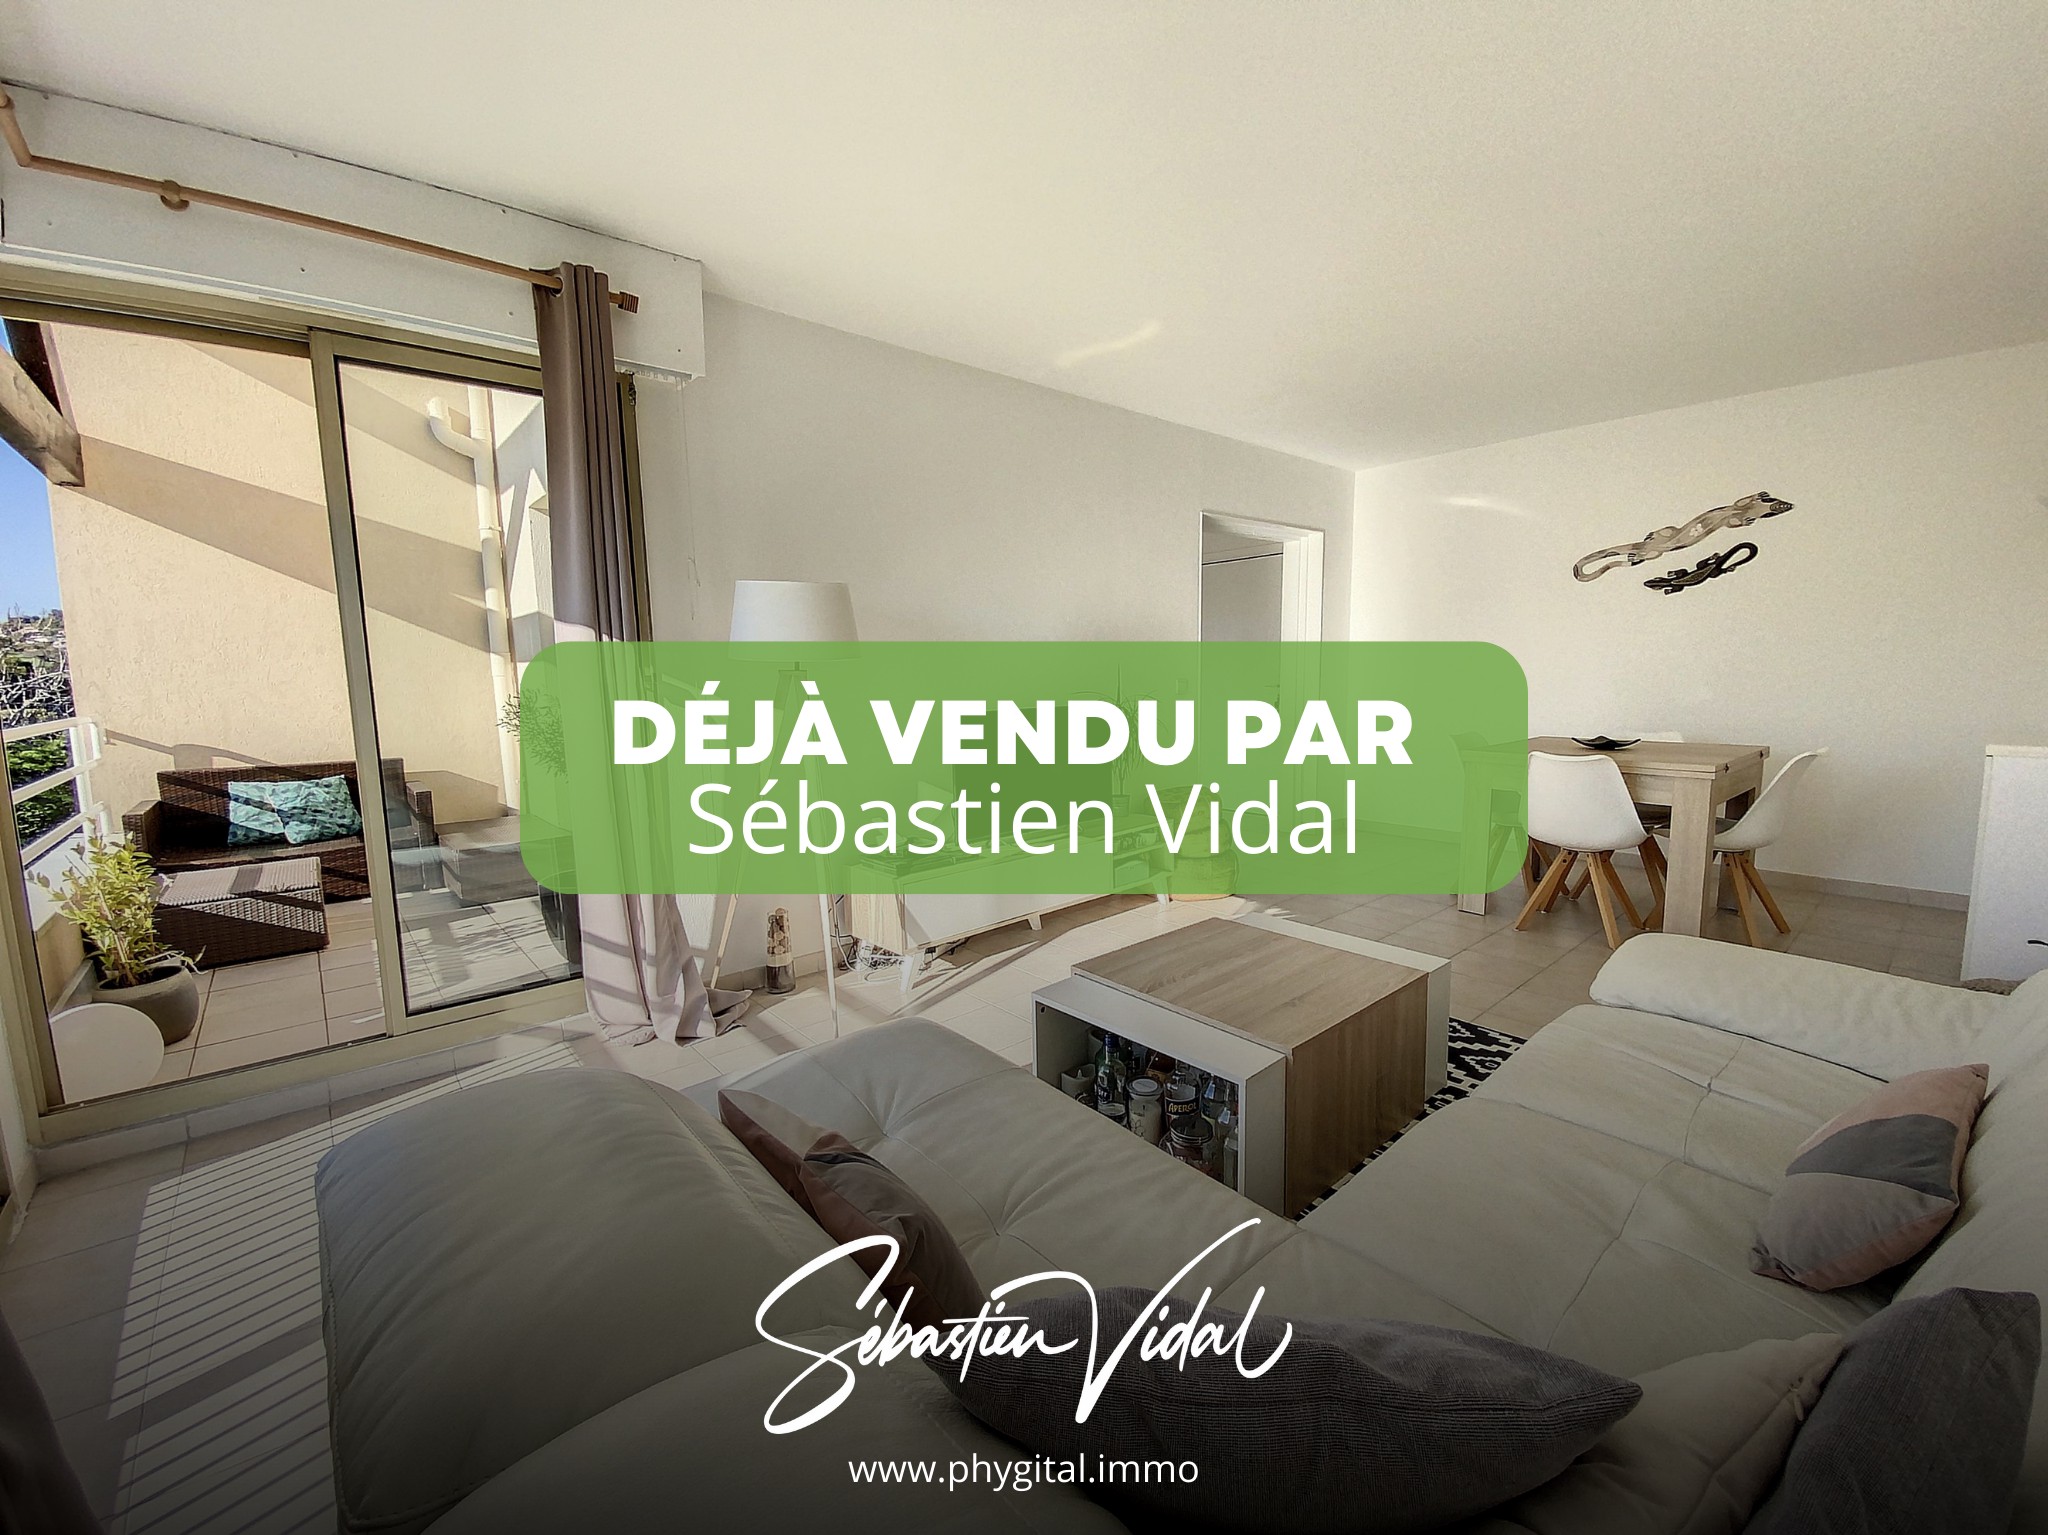 Vente Appartement 52m² 2 Pièces à Antibes (06600) - Phygital.Immo